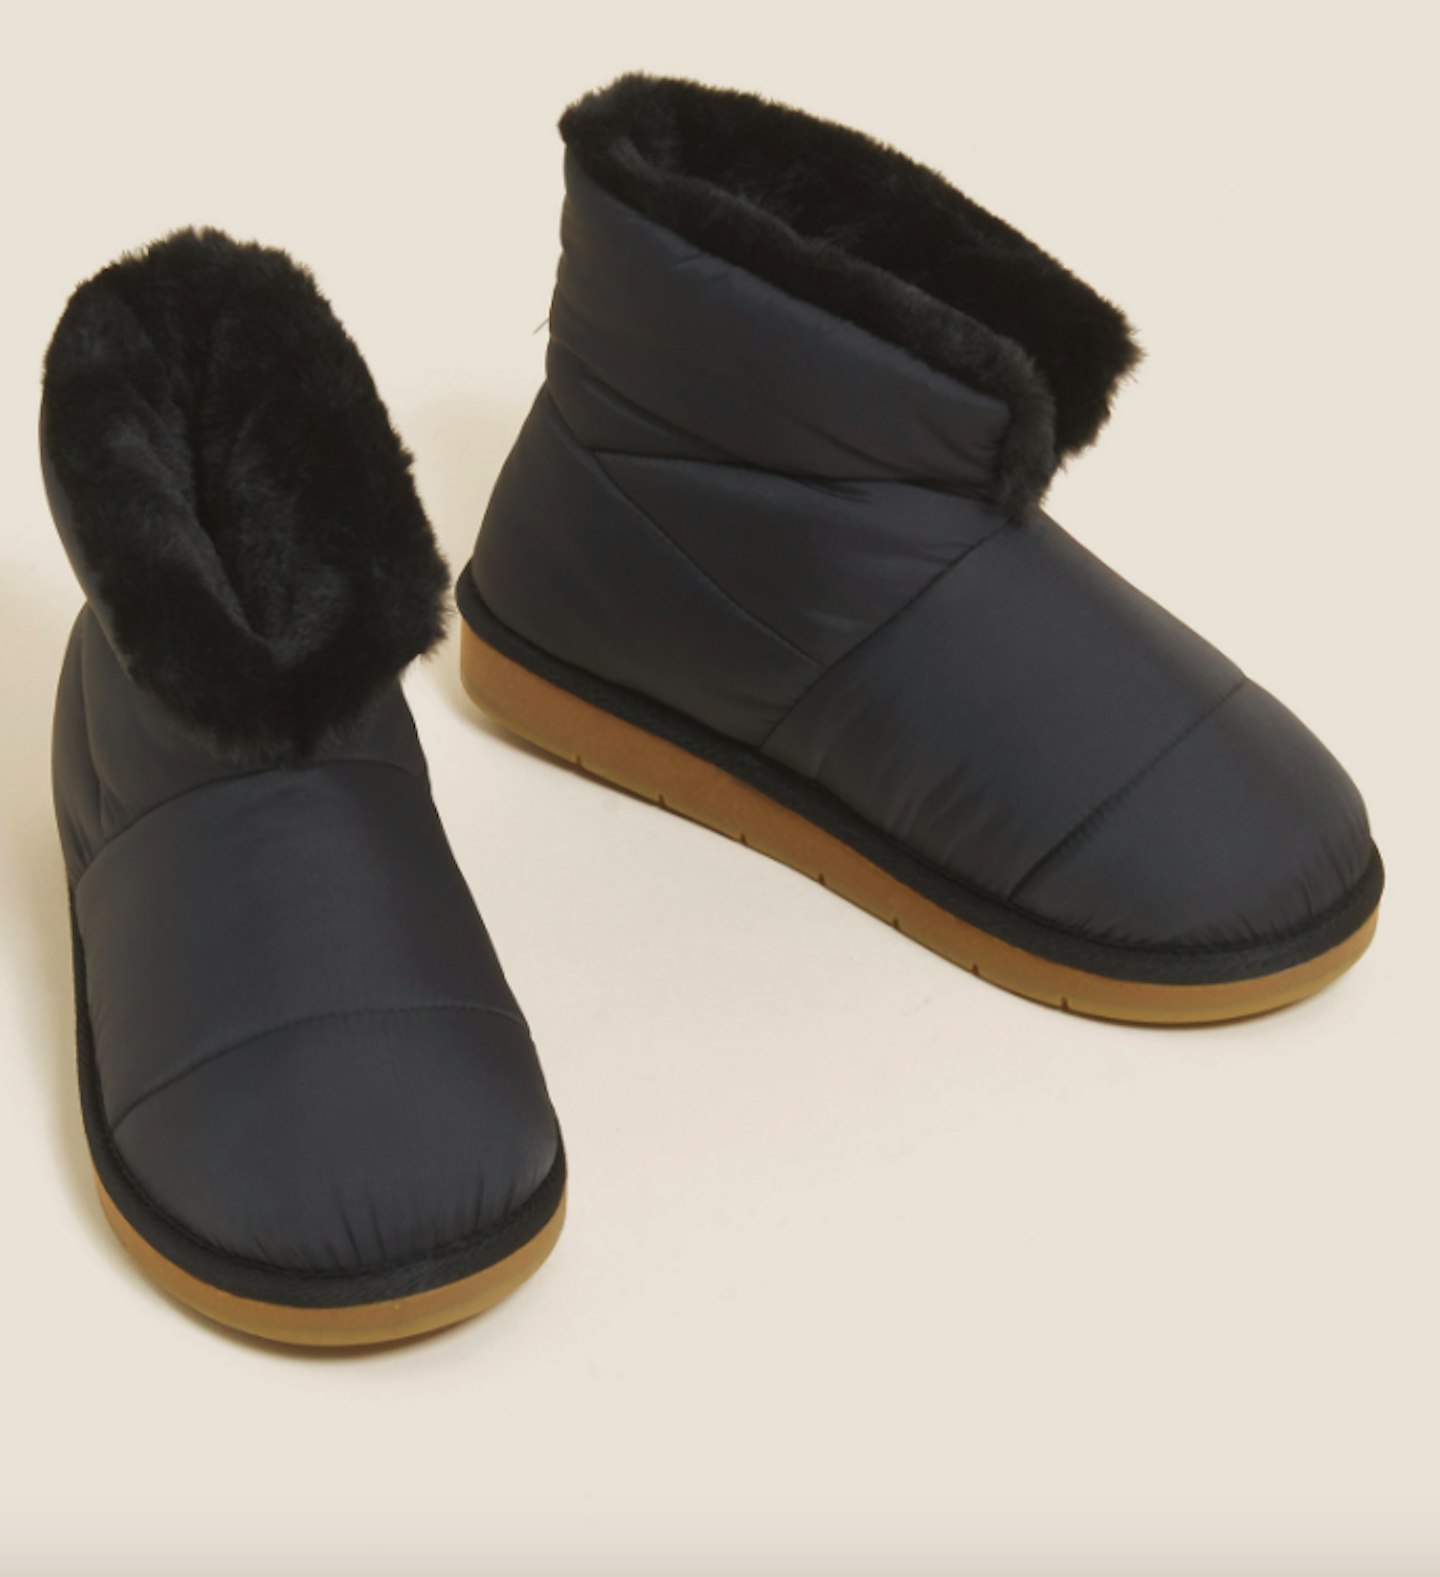 M&S, Quilted Faux Fur-Lined Slipper Boots, £25